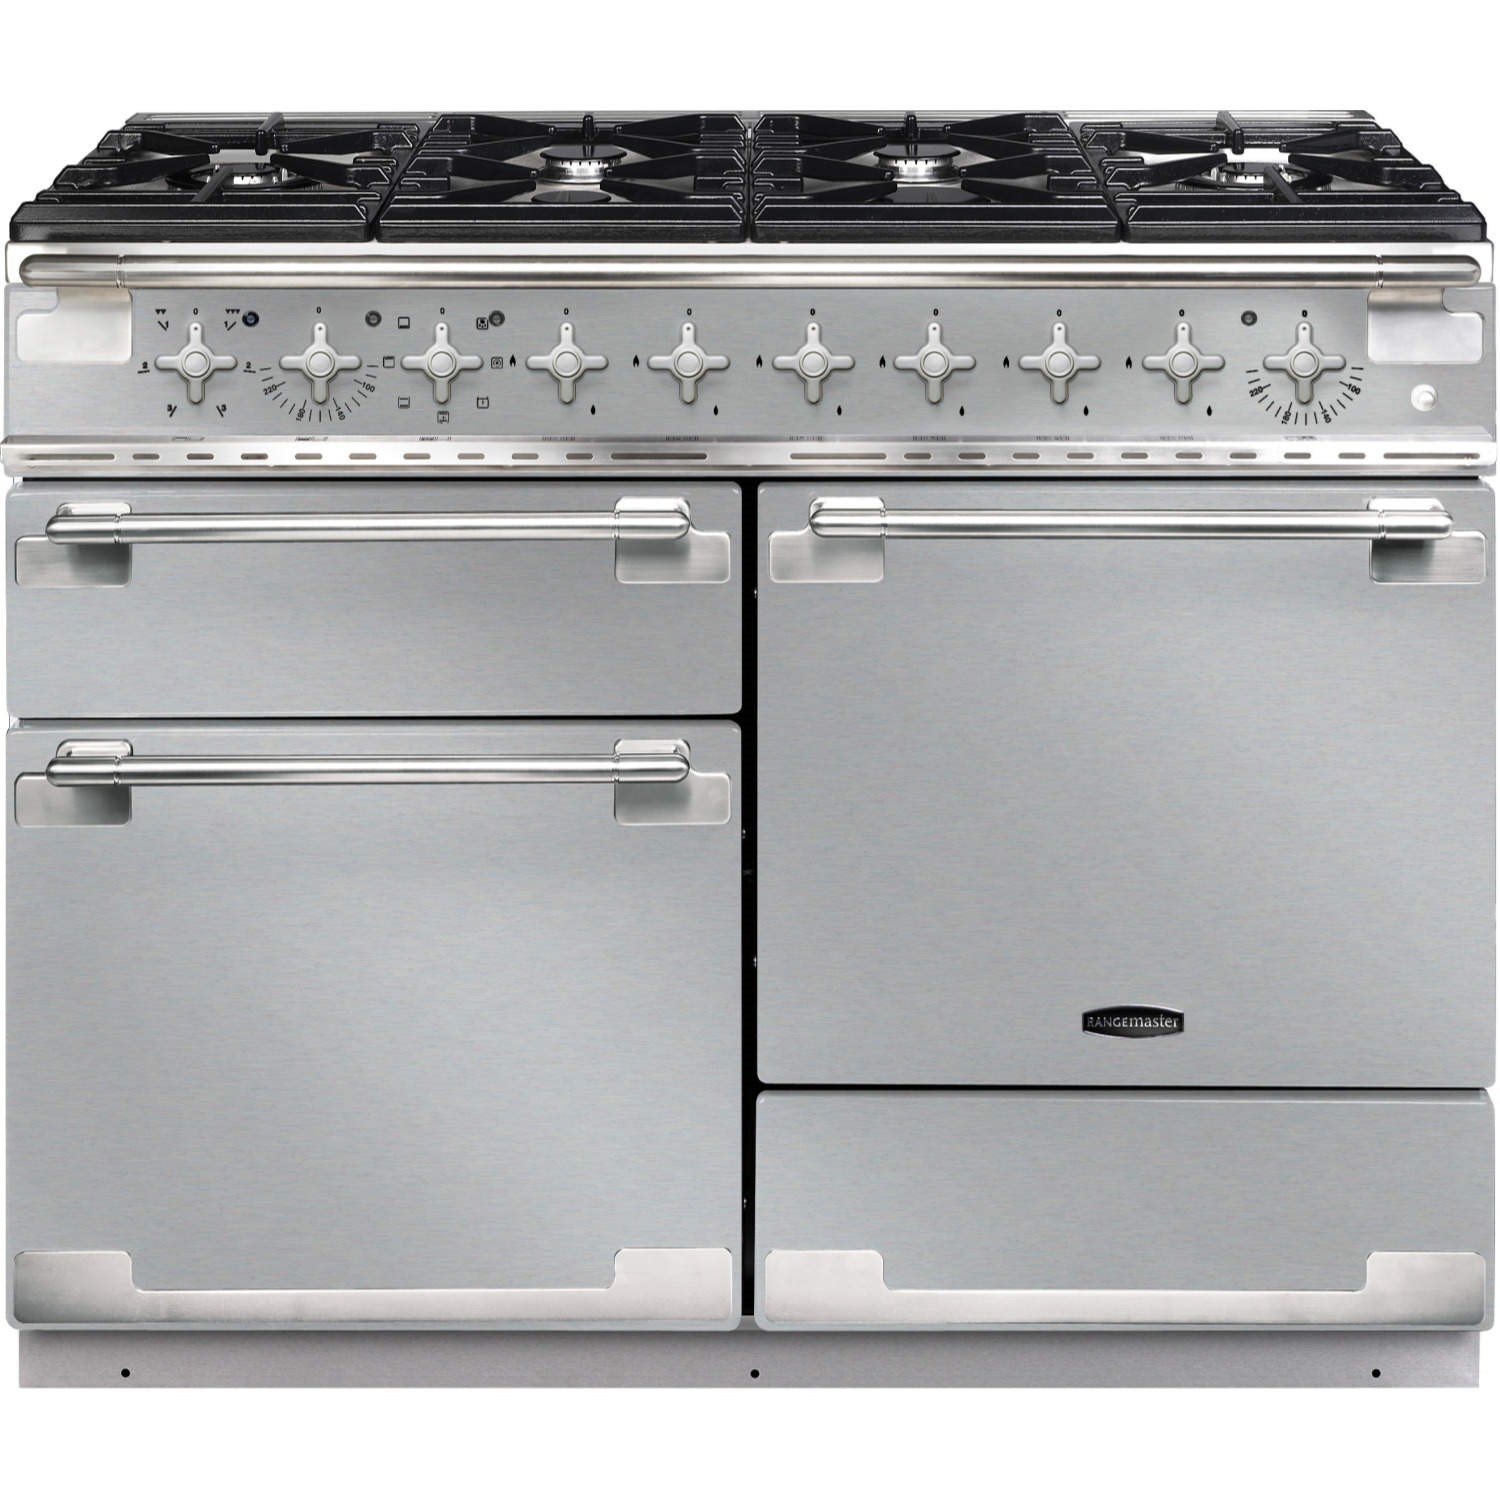 Rangemaster Elise ELS110DFFSS 110cm Dual Fuel Range Cooker - Stainless Steel - A/A Rated